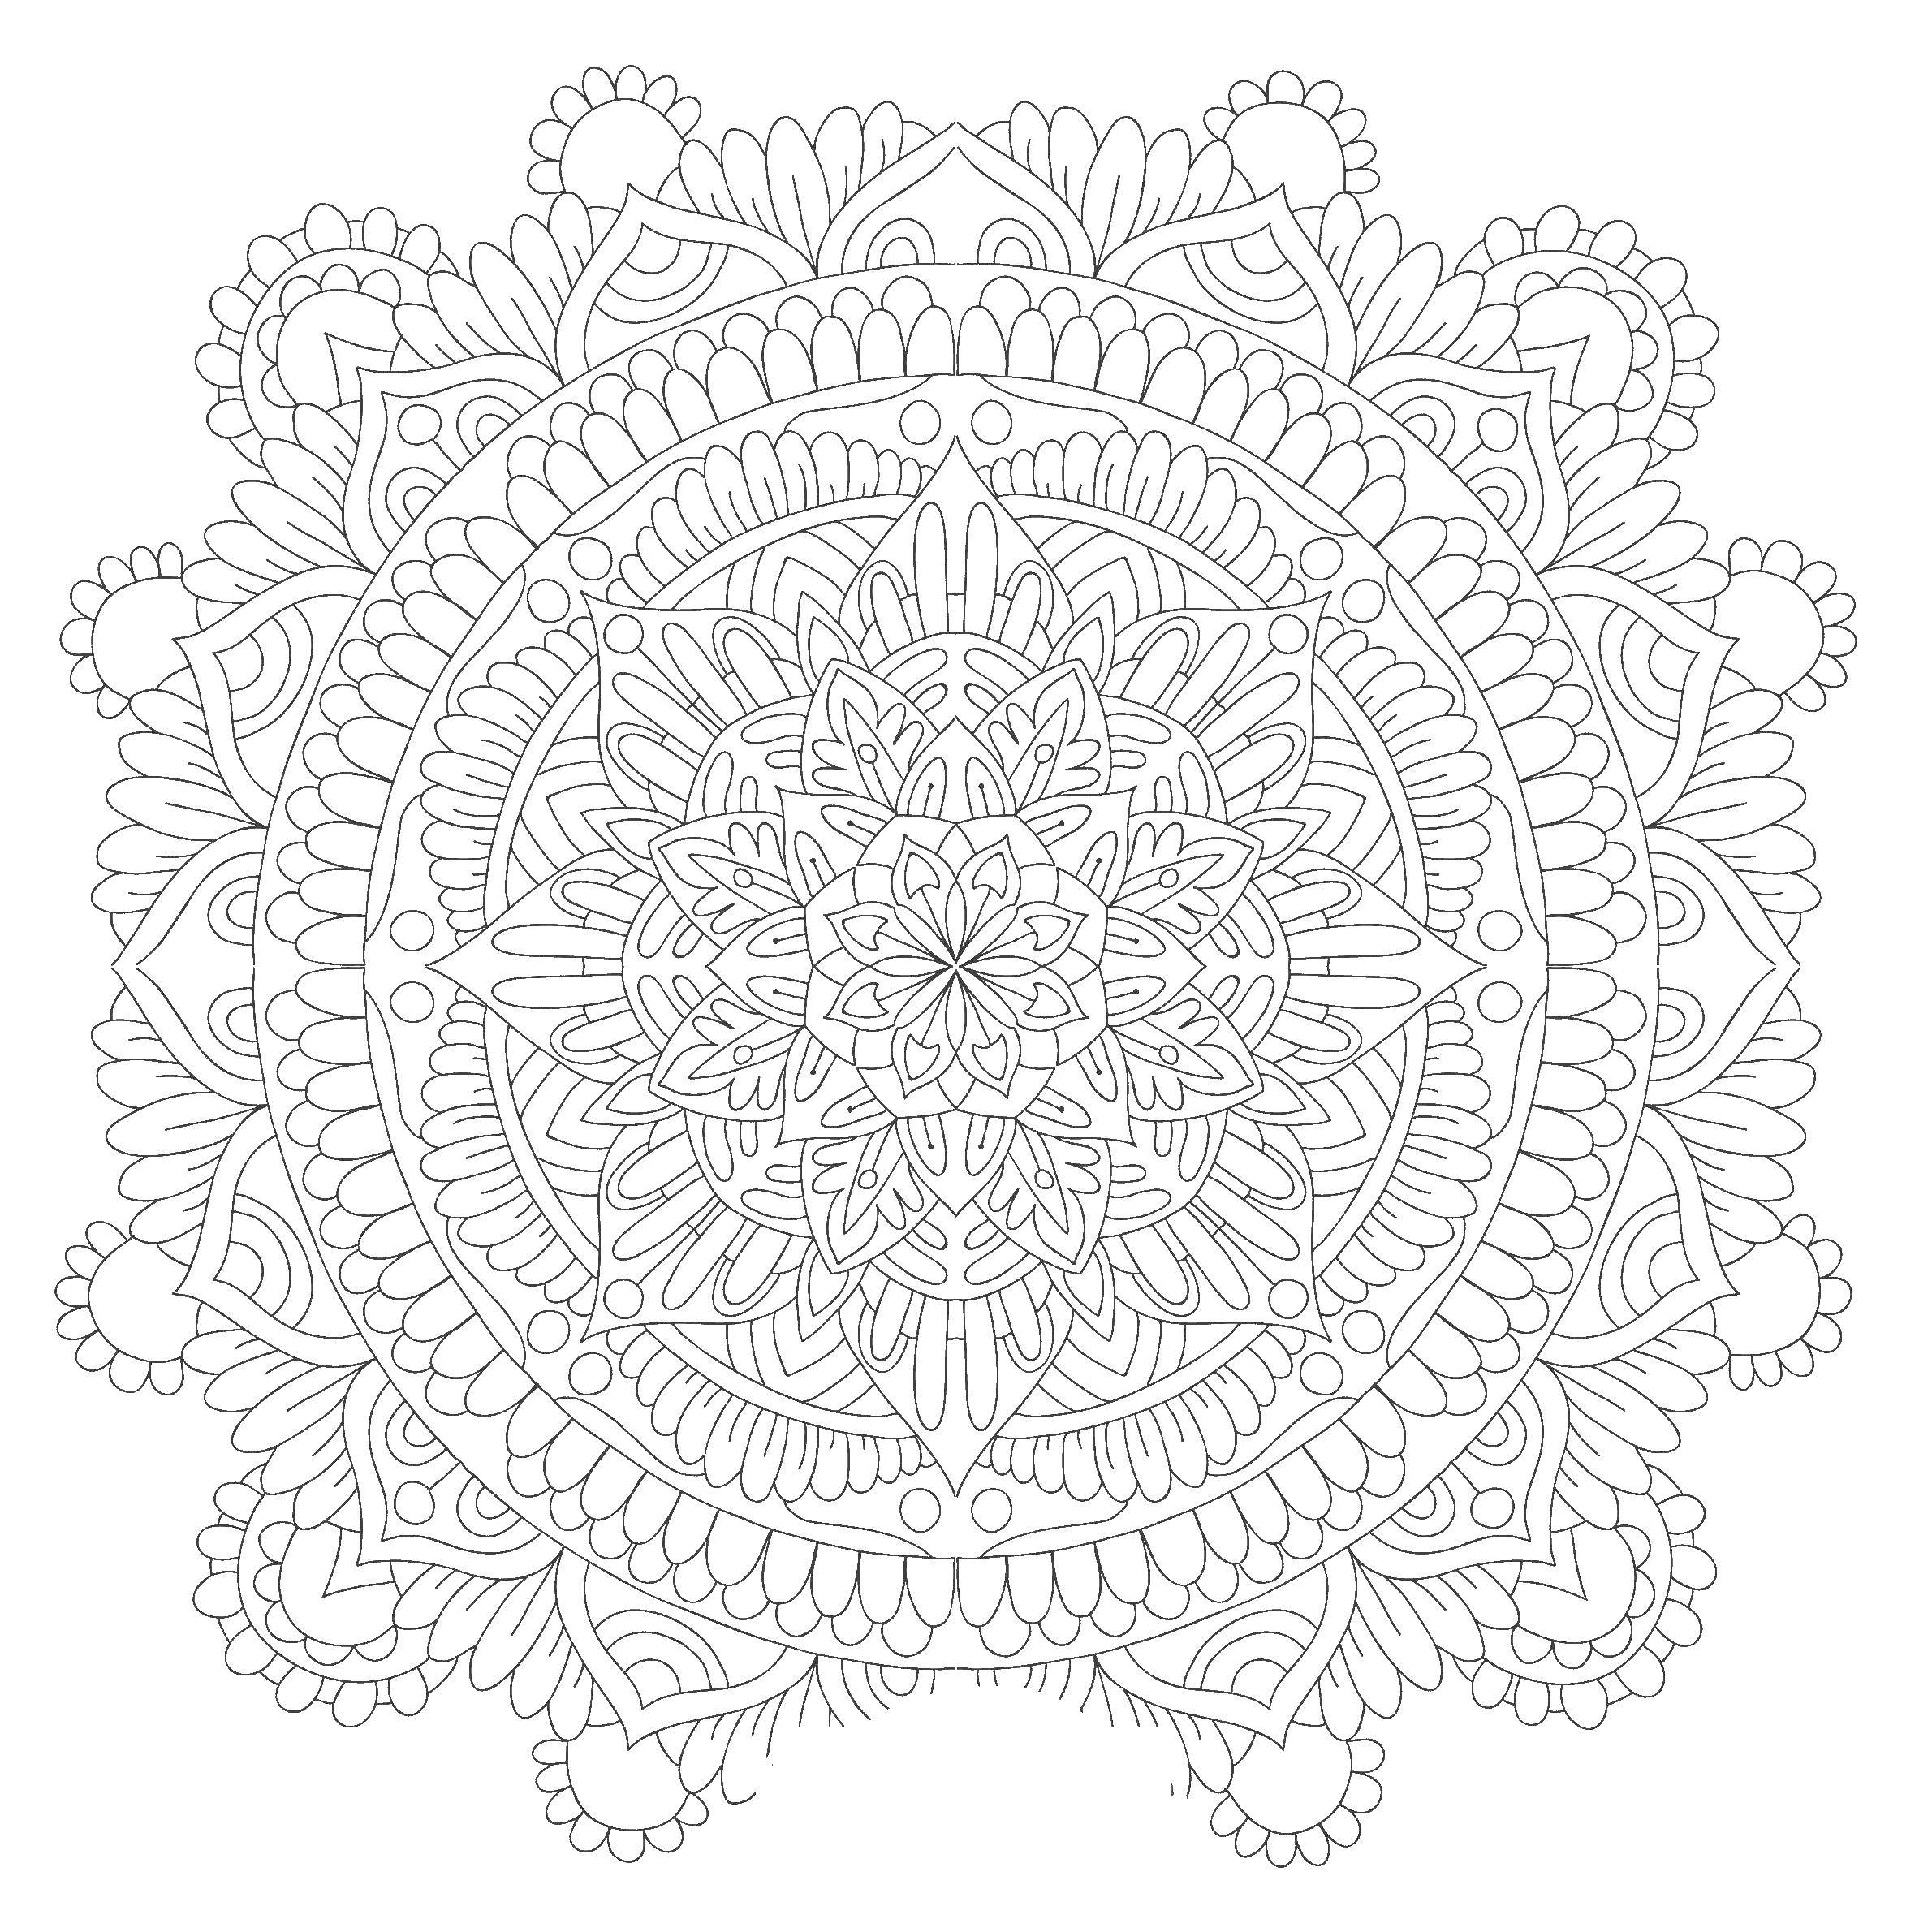 Coloring Beautiful drawing of patterns. Category patterns. Tags:  patterns, shapes, drawing.